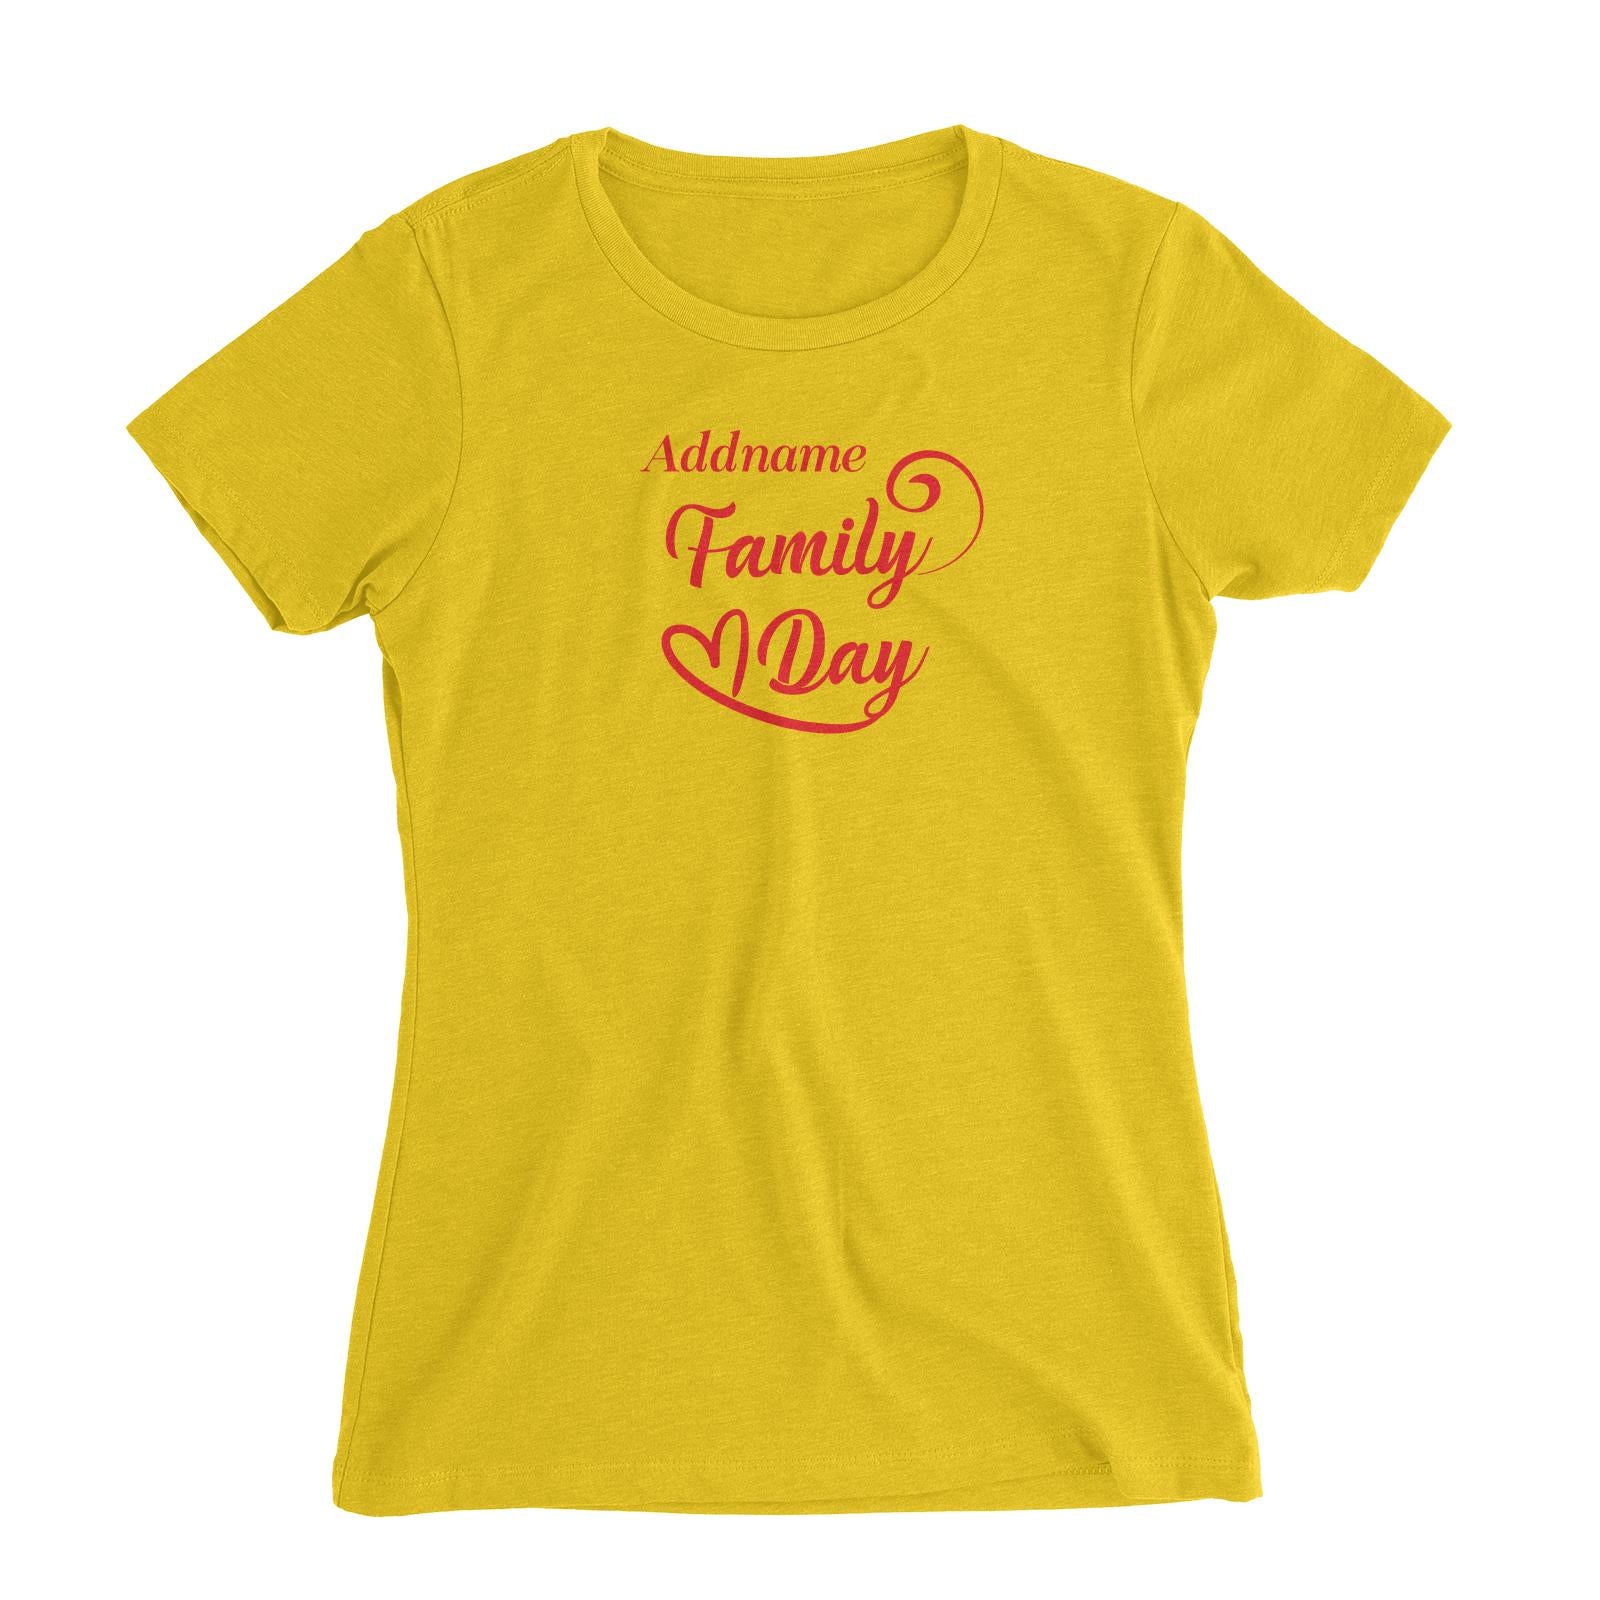 Family Day Love Curve Family Day Addname Women Slim Fit T-shirt